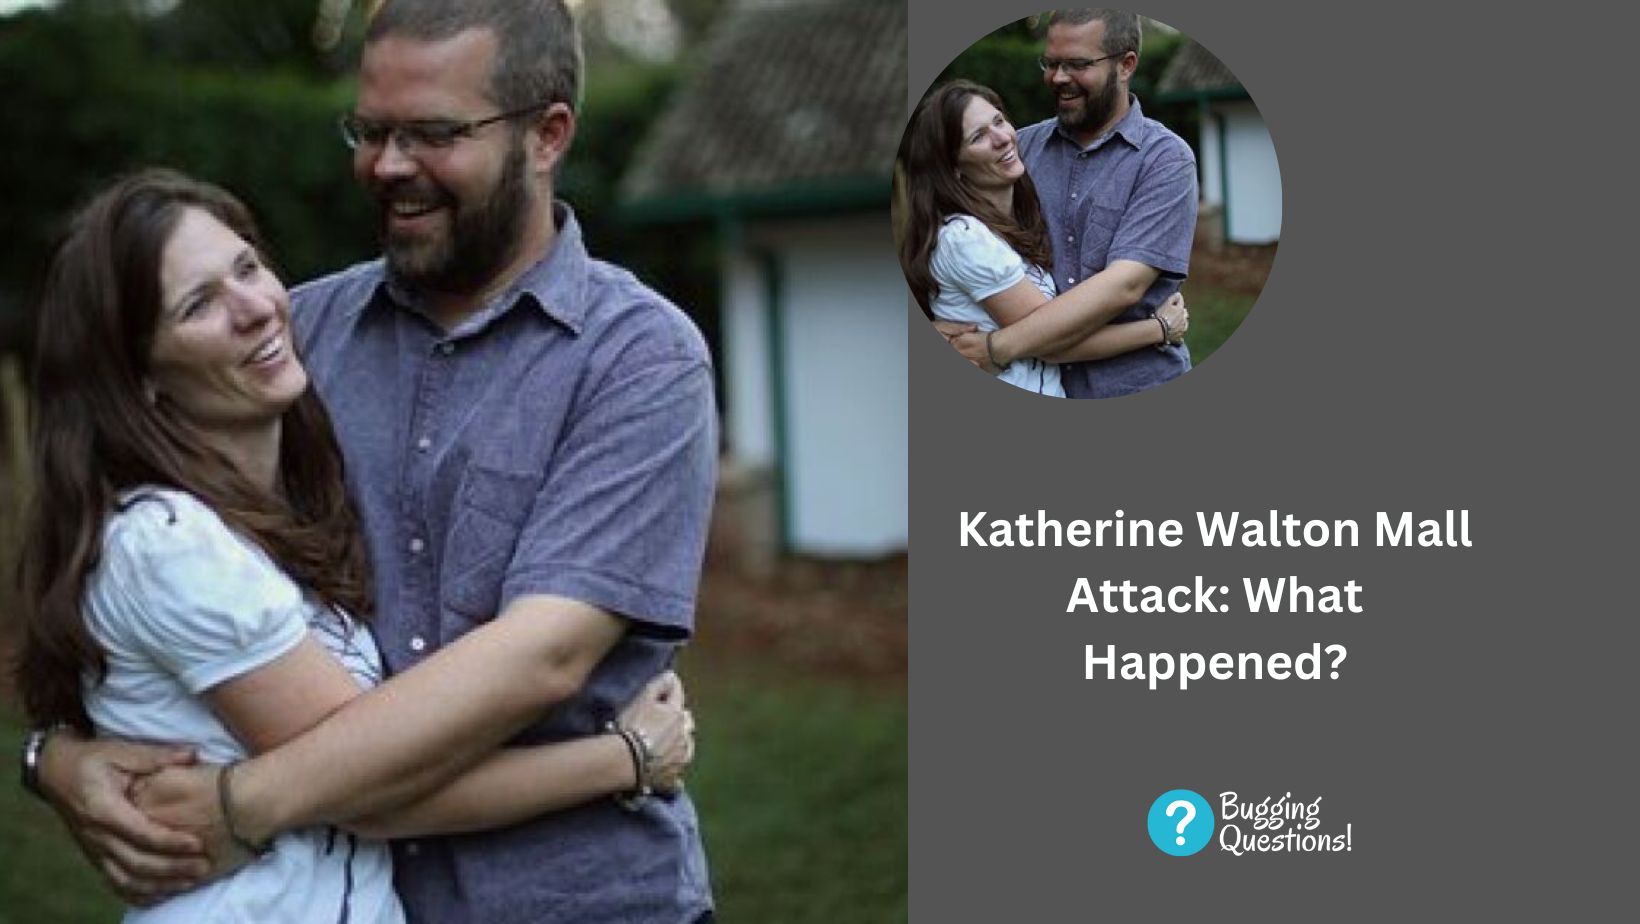 Katherine Walton Mall Attack: What Happened?